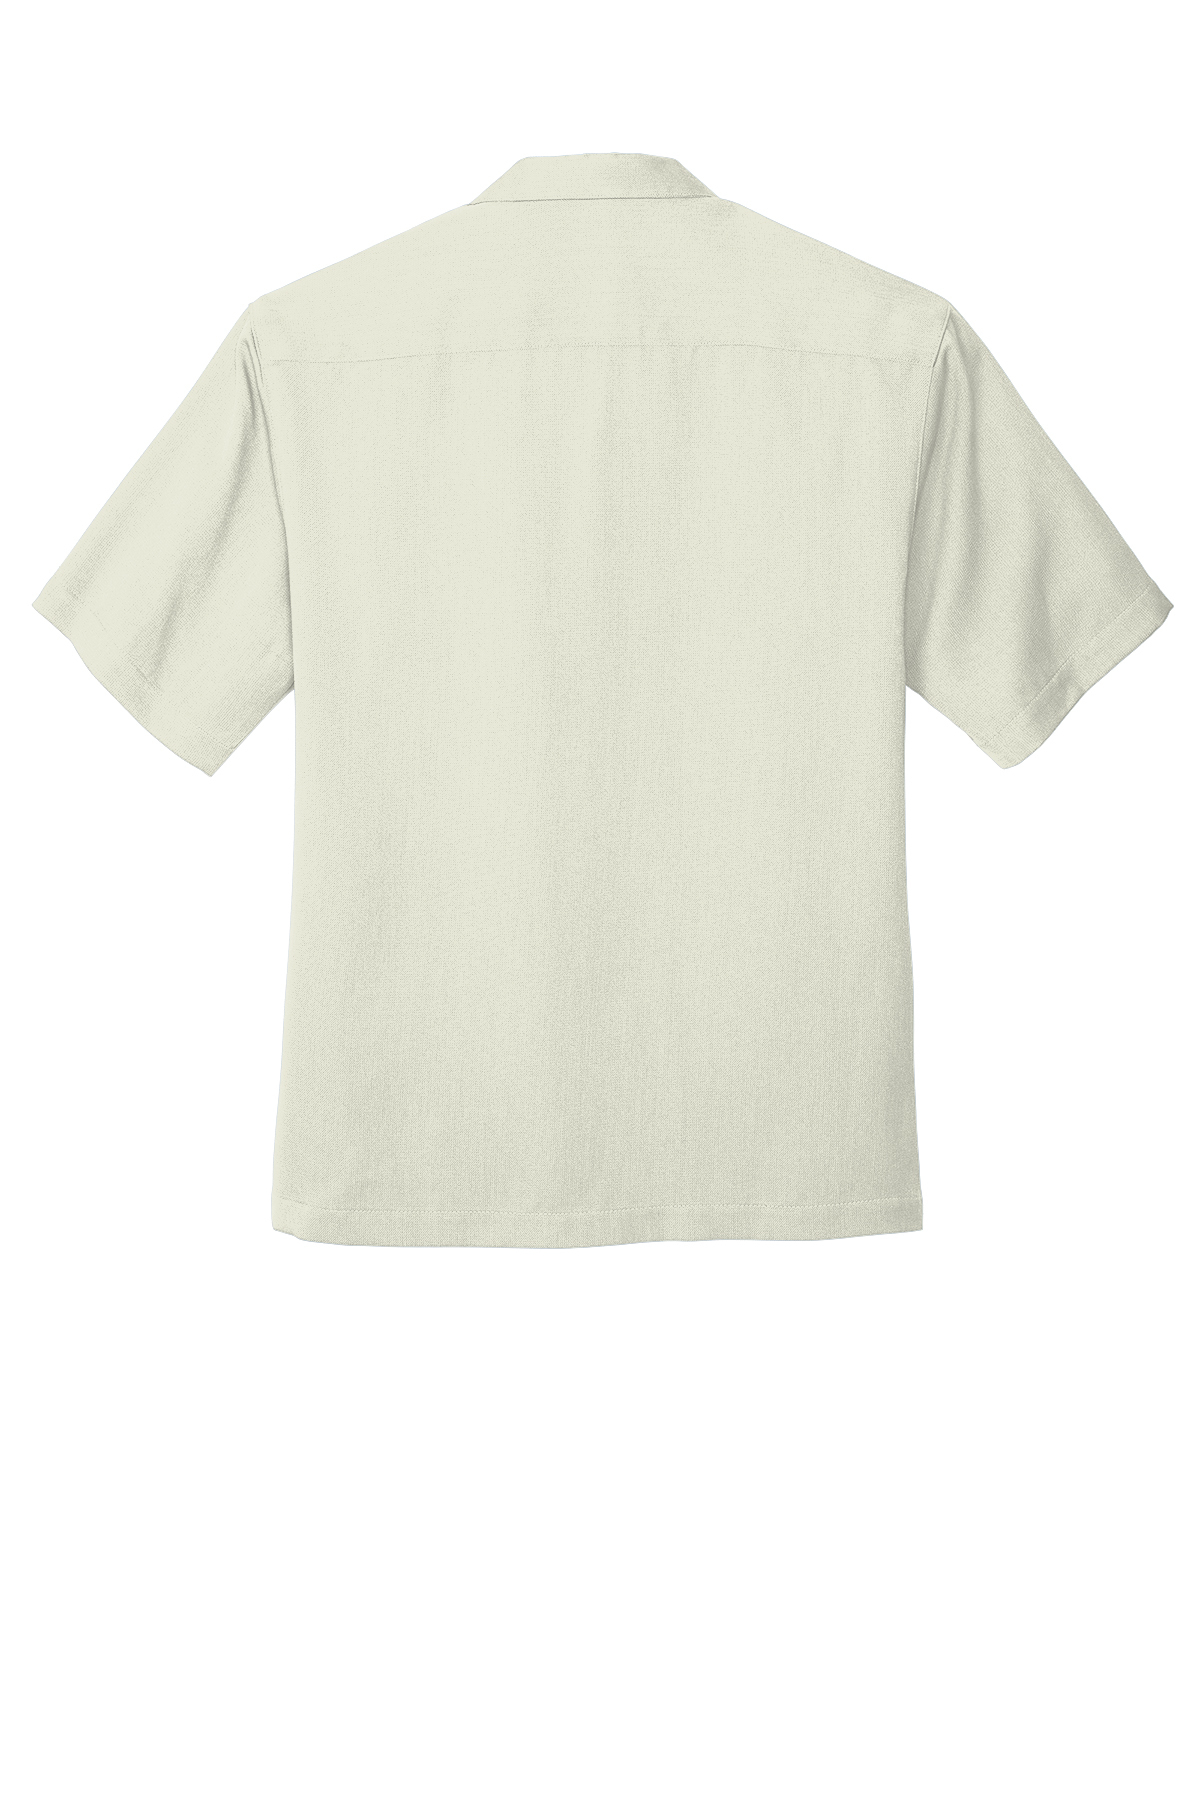 Port Authority Easy Care Camp Shirt, Product